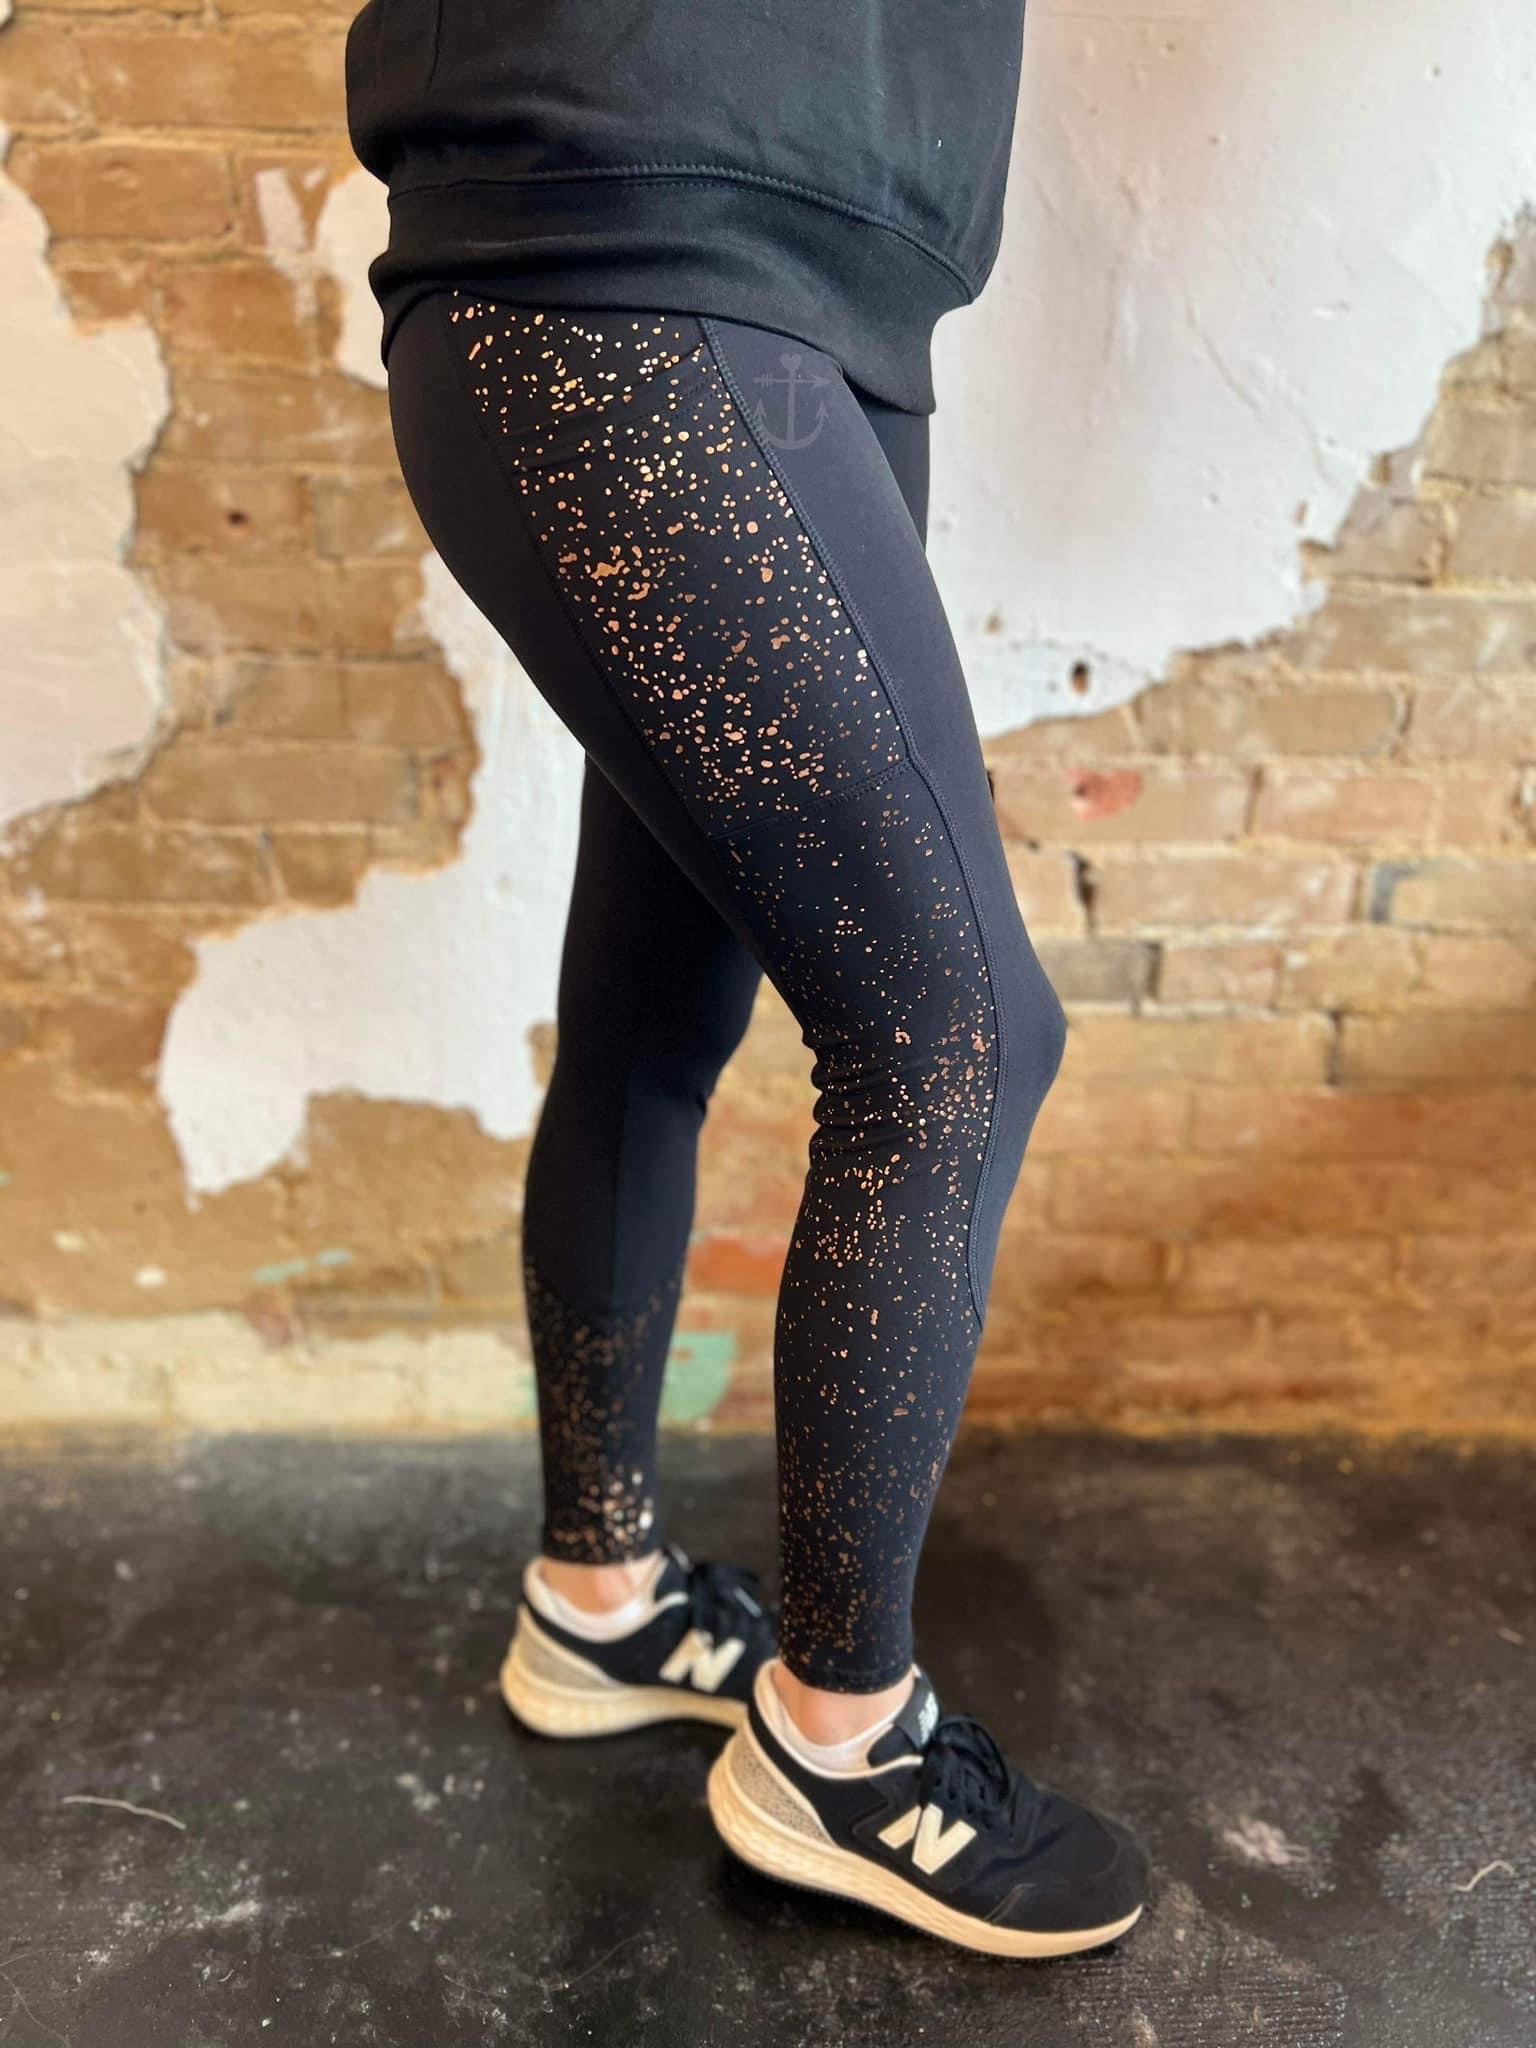 3X ONLY Anchored Arrows Leggings in Black + Rose Gold Metallic